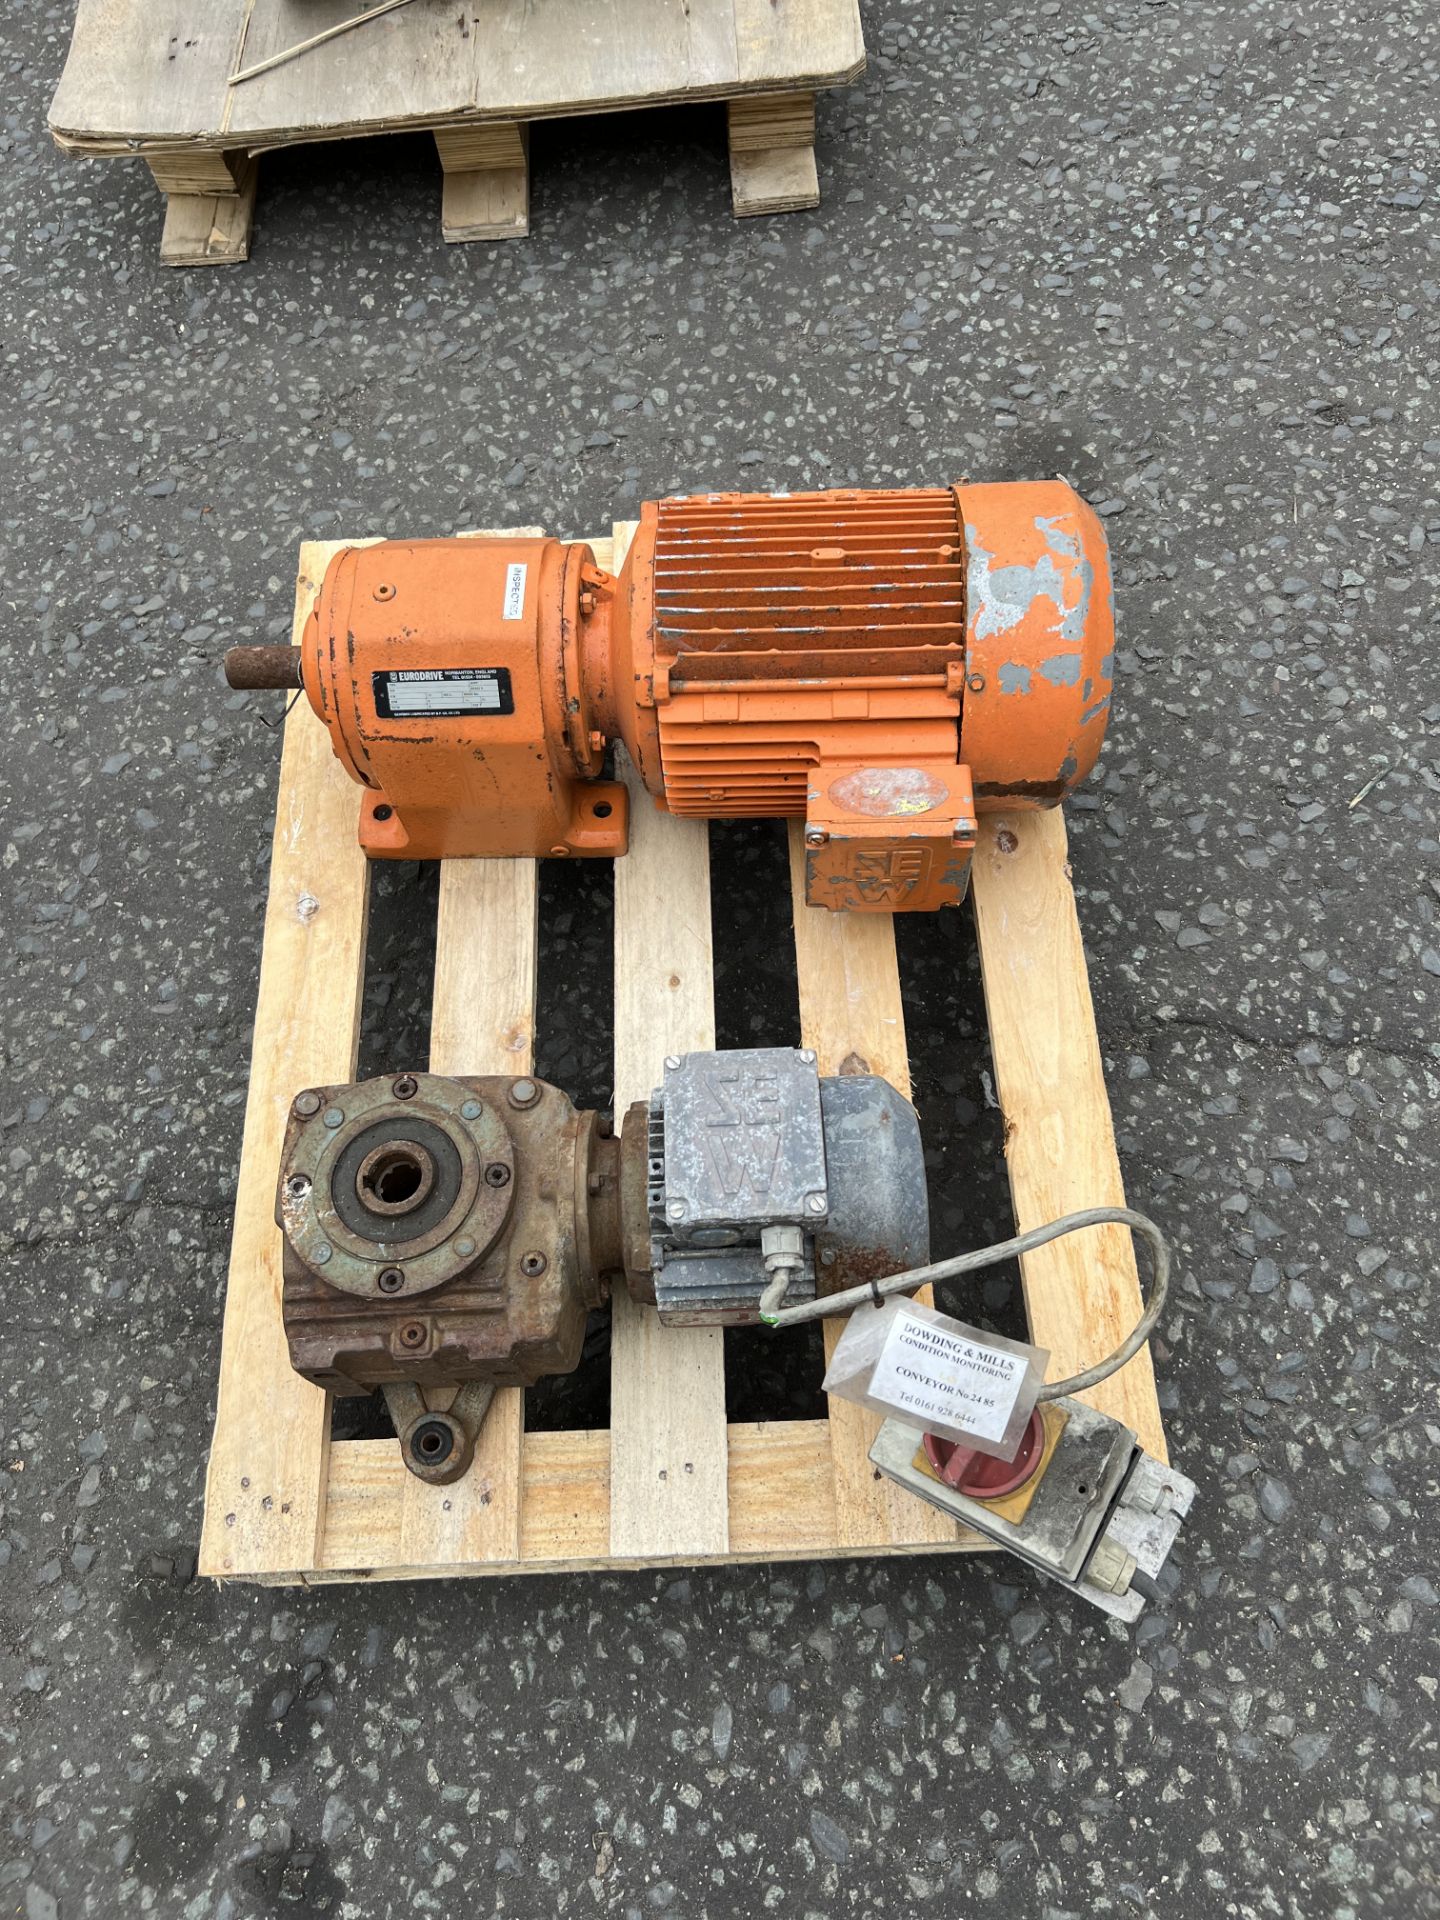 SEW & Eurodrive Electric Motors, with gearboxes, a